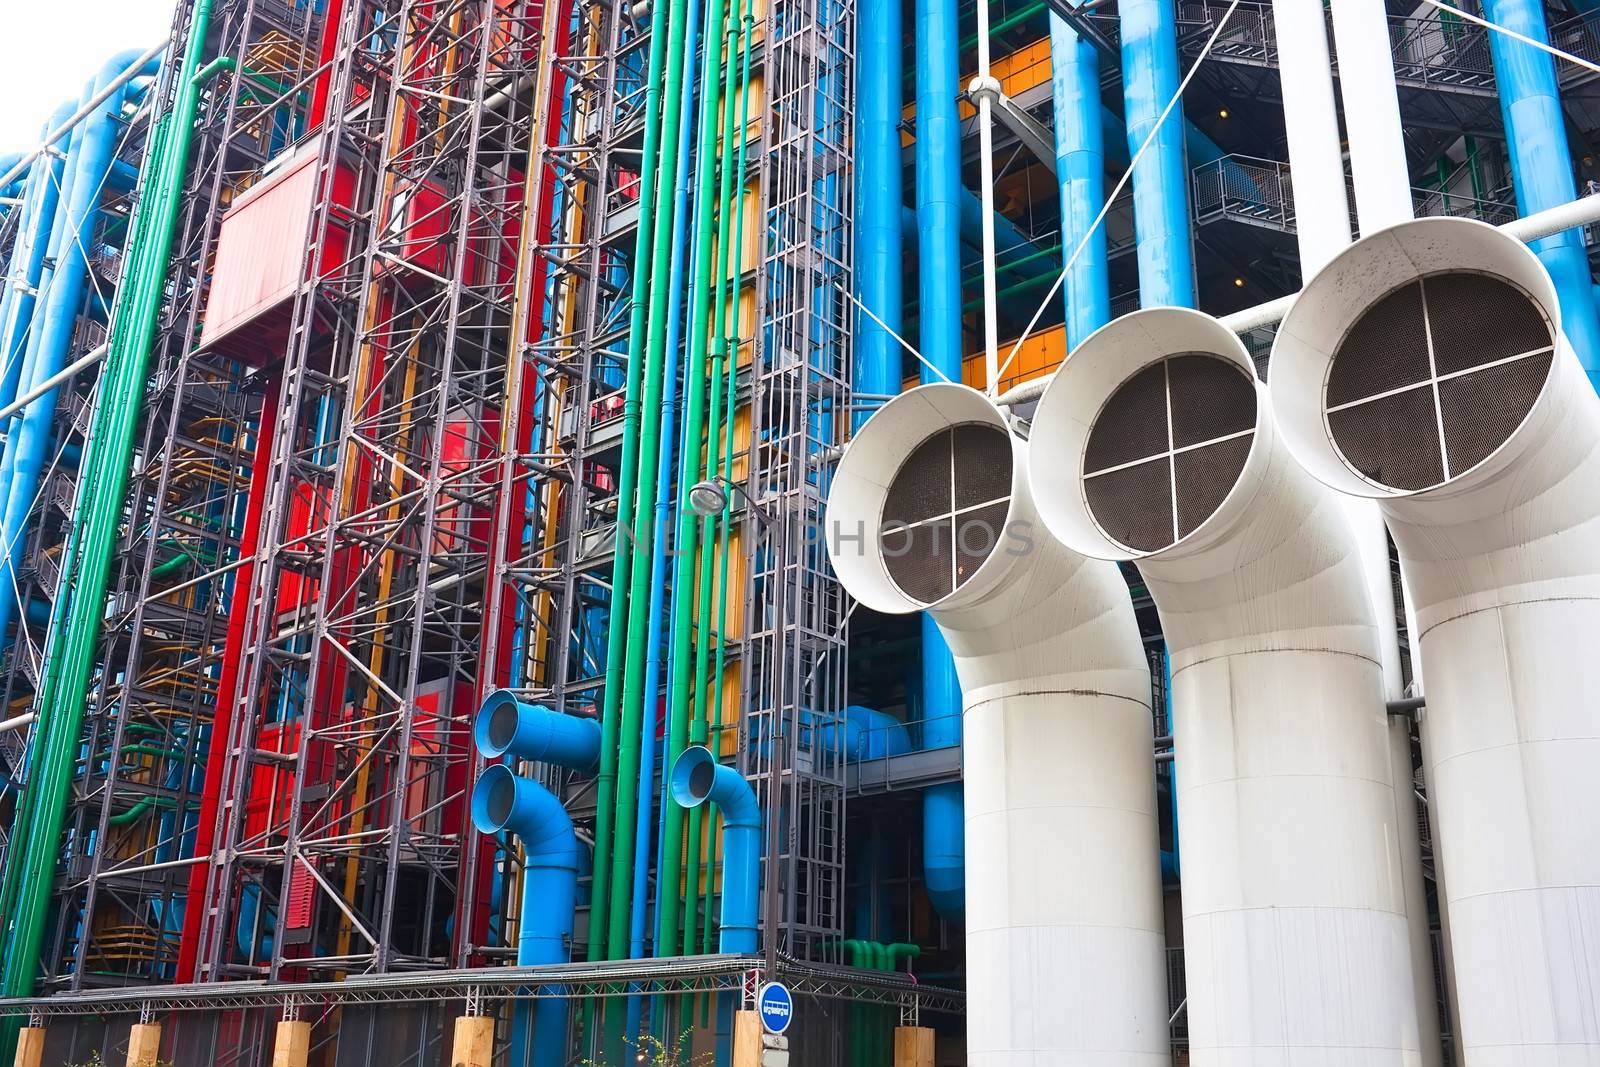 Pompidou centre in France by sailorr